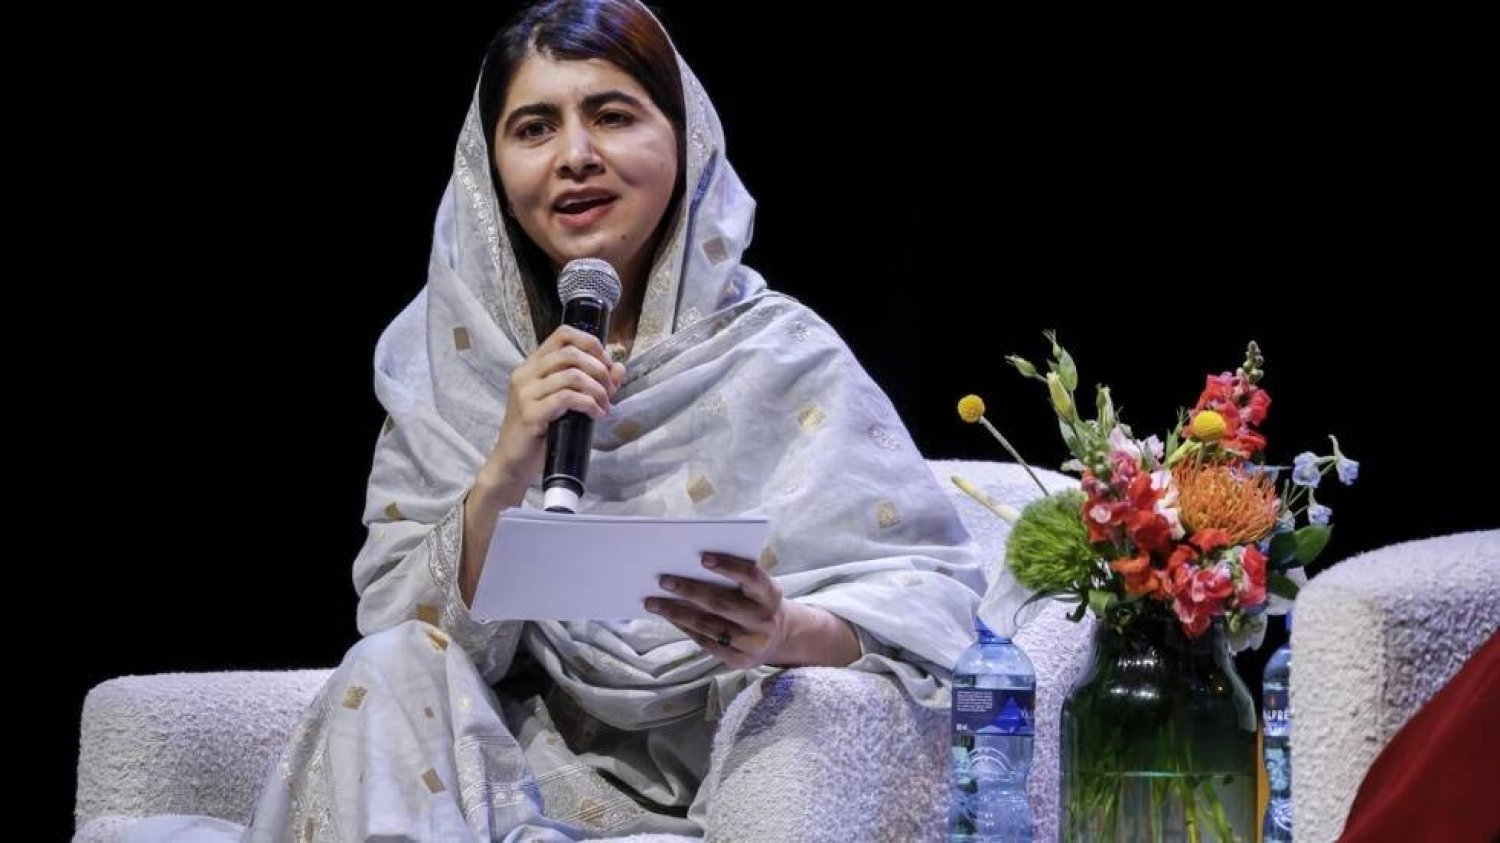 Nobel Peace Prize laureate Malala Yousafzai participates in a panel discussion in Johannesburg in December 2023. PHILL MAGAKOE / AFP/File
